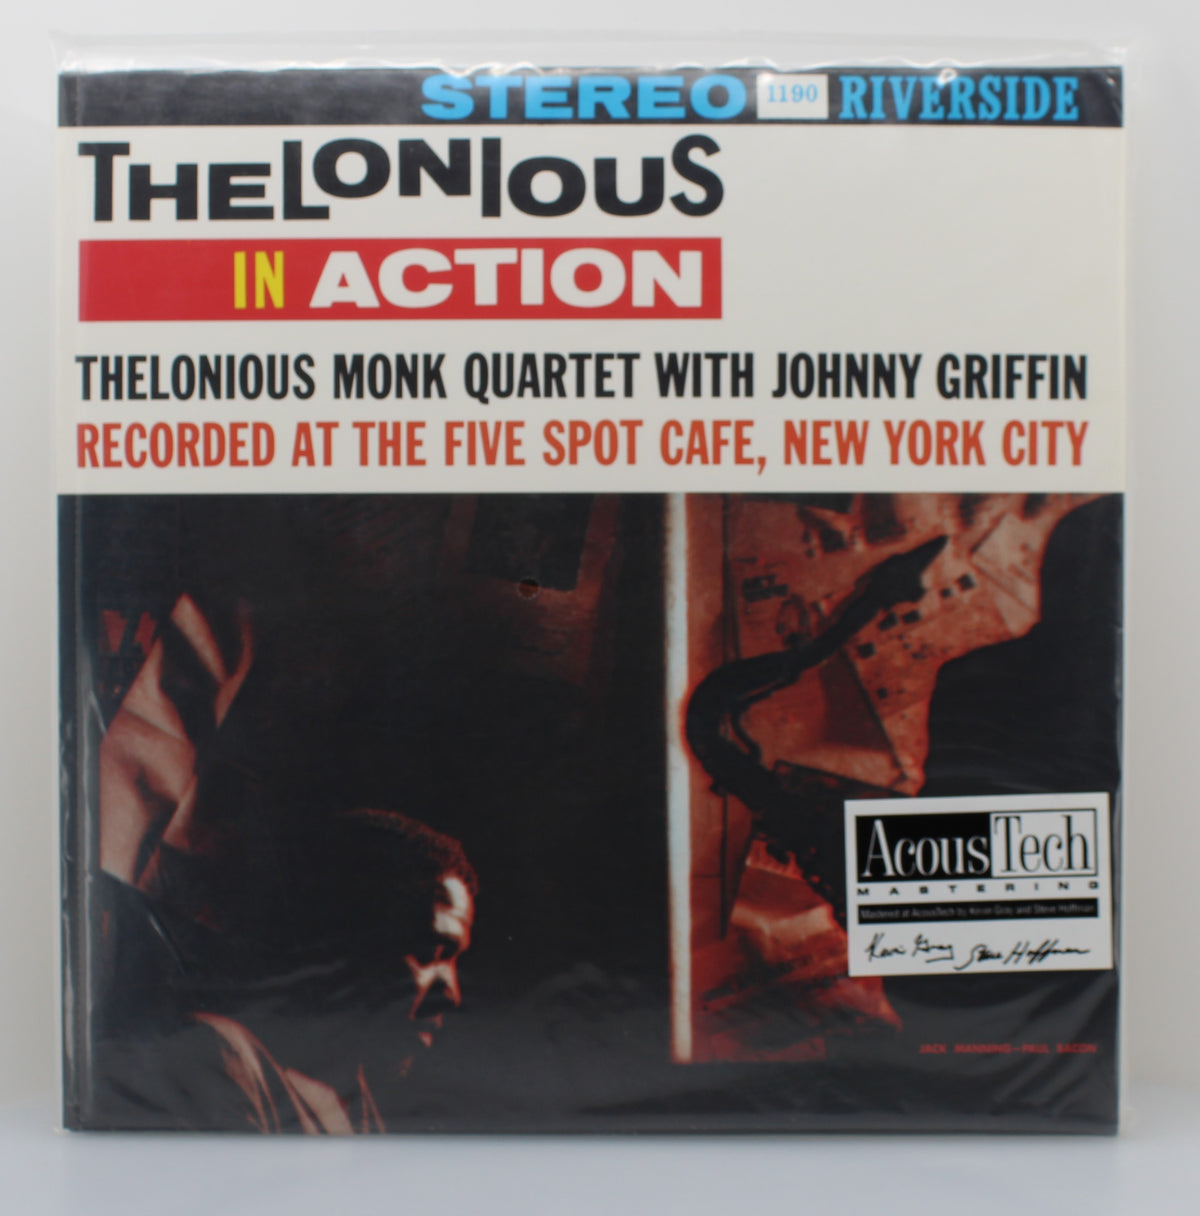 Thelonious Monk Quartet With Johnny Griffin ‎– Thelonious In Action, 2 × Vinyl, LP, 45 RPM, Reissue, Remastered, 180 Gram, Jazz, USA 2004